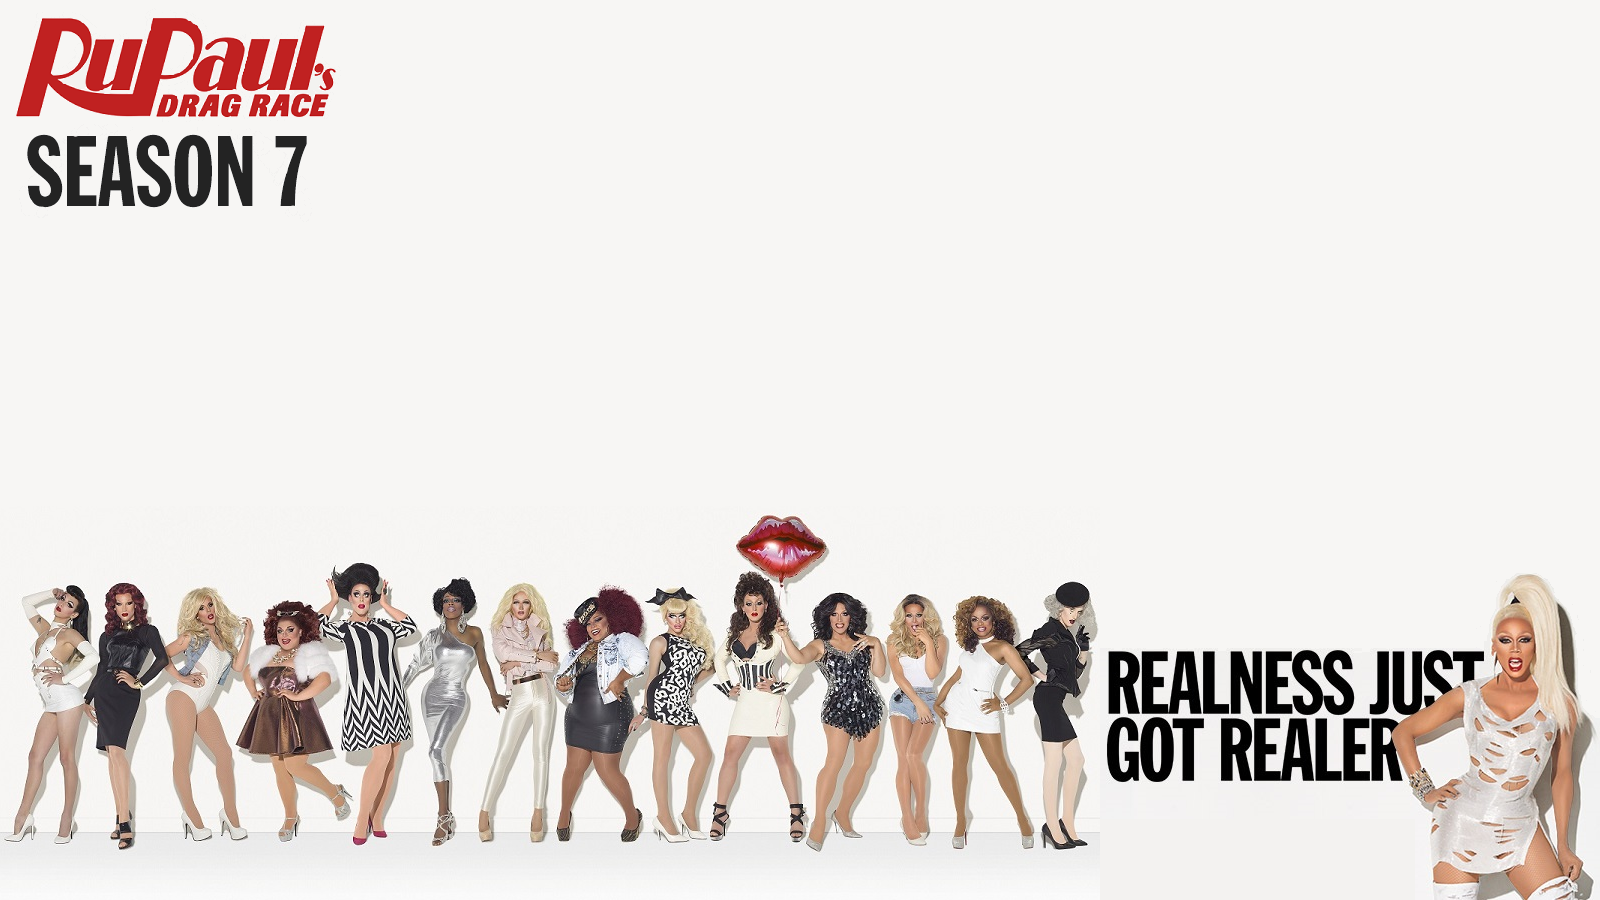 I made a Drag Race desktop background, I think it turned out pretty good! (1600x900)